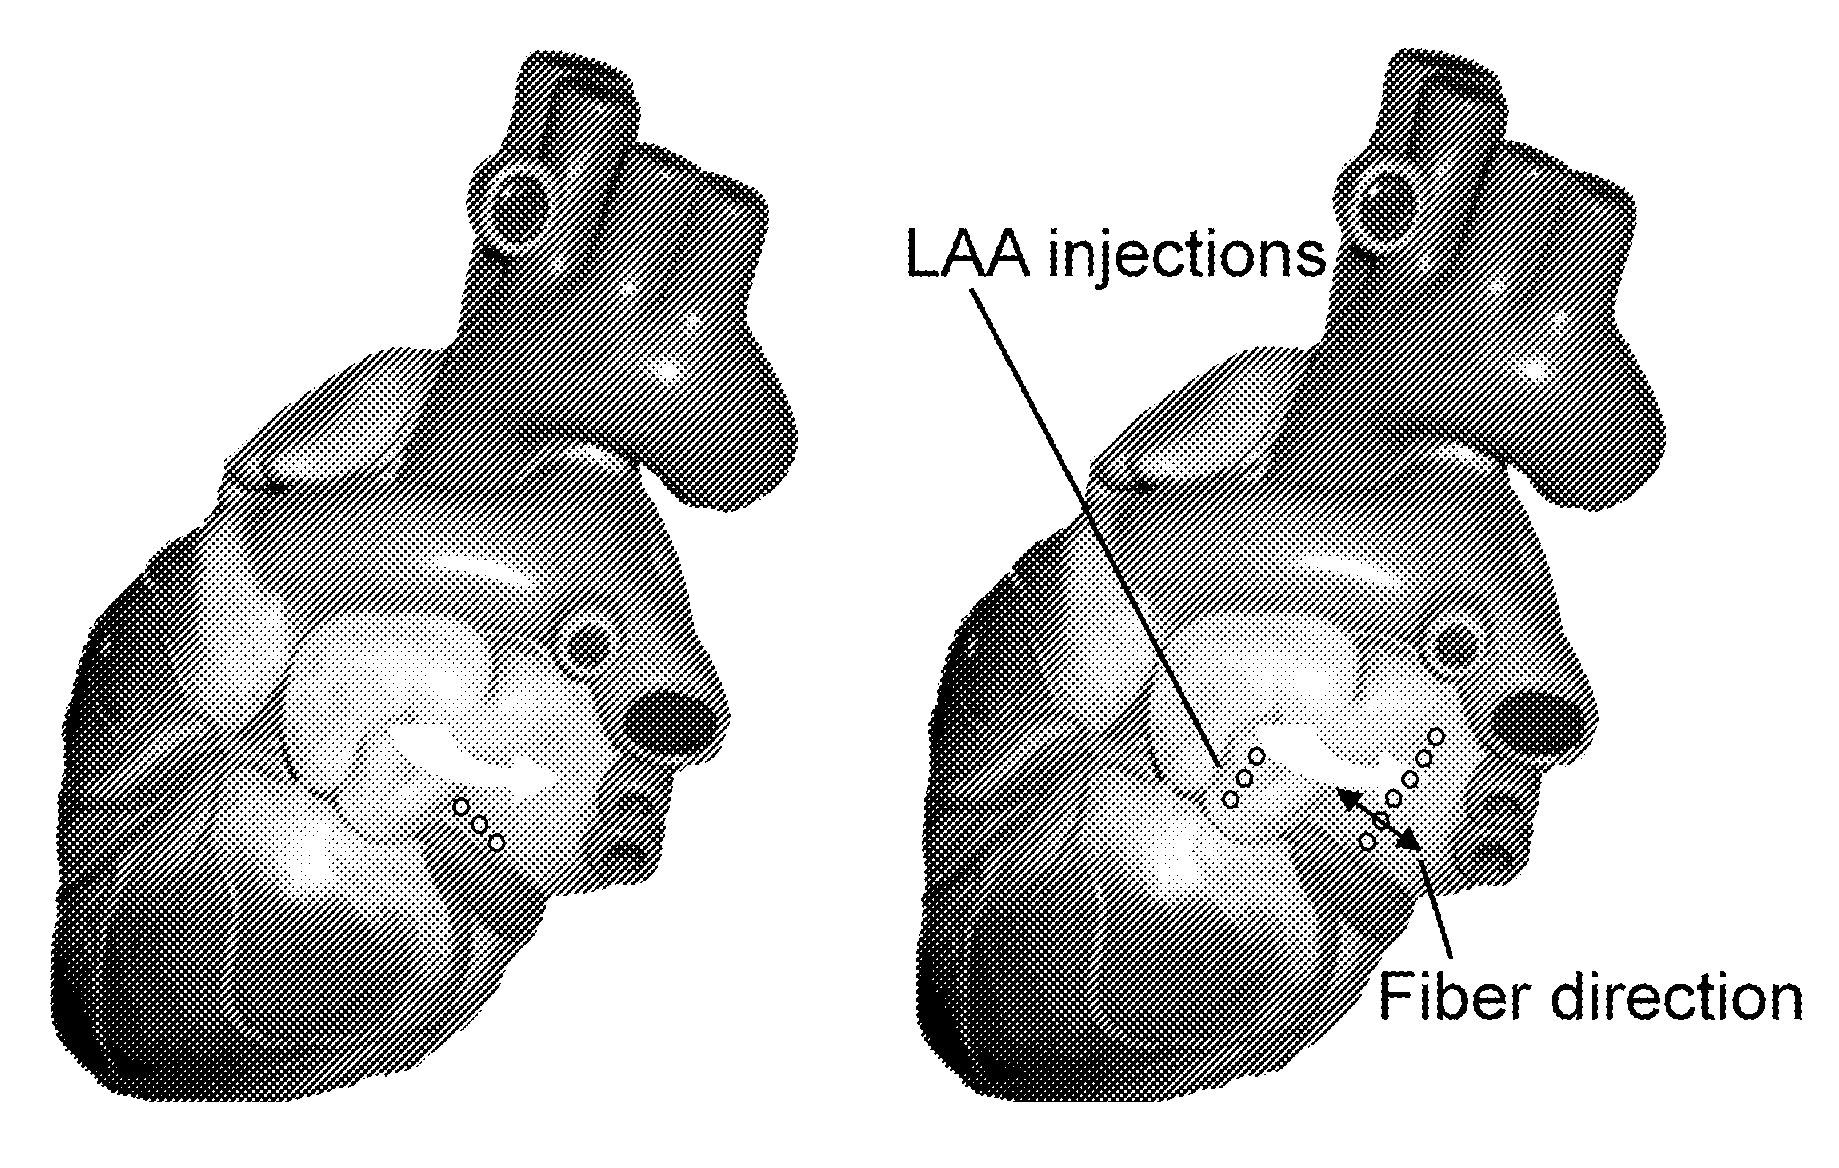 Delivery methods for a biological pacemaker minimizing source-sink mismatch